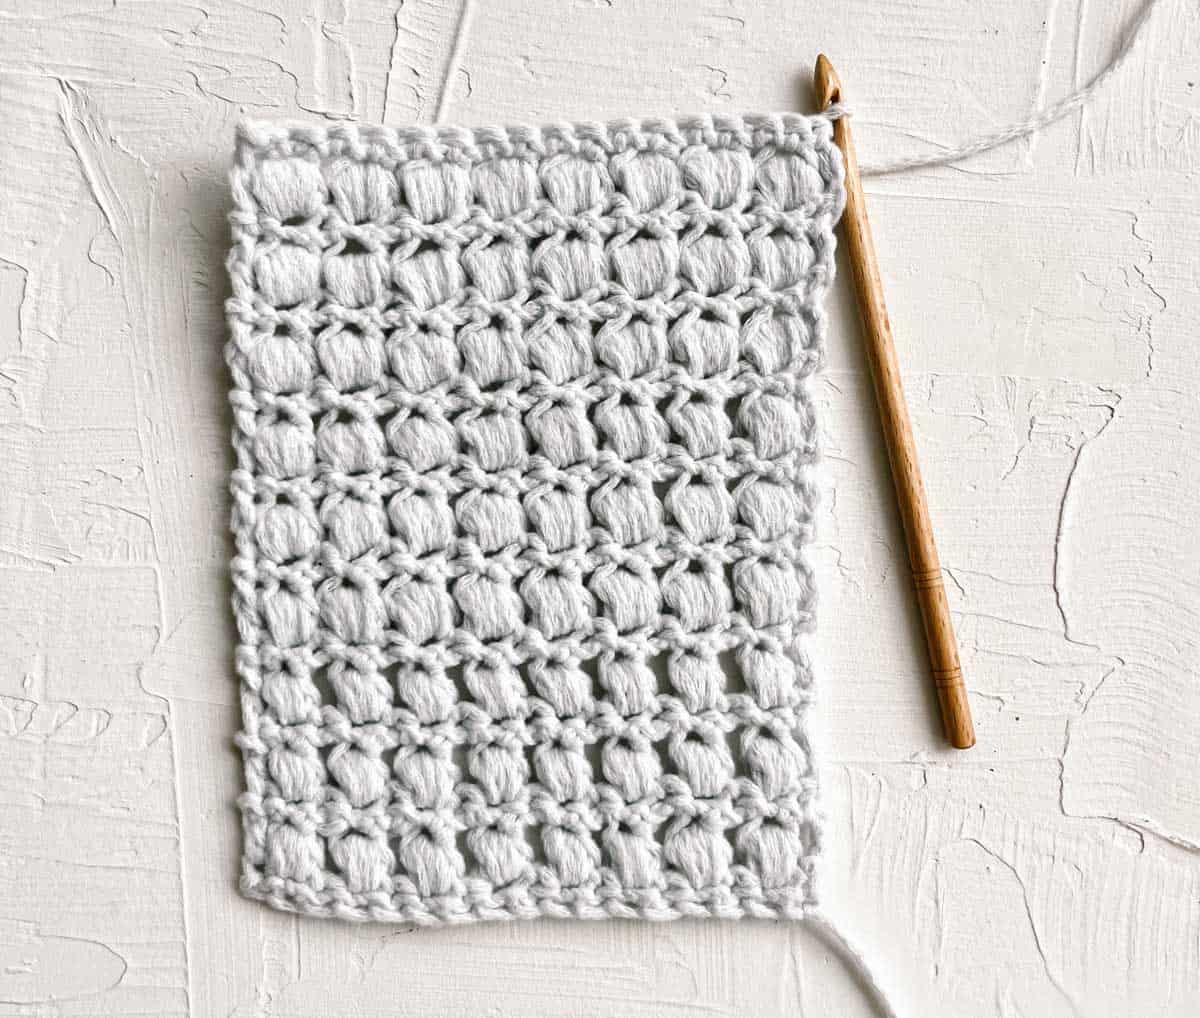 The backside of a swatch of crochet puff stitches.